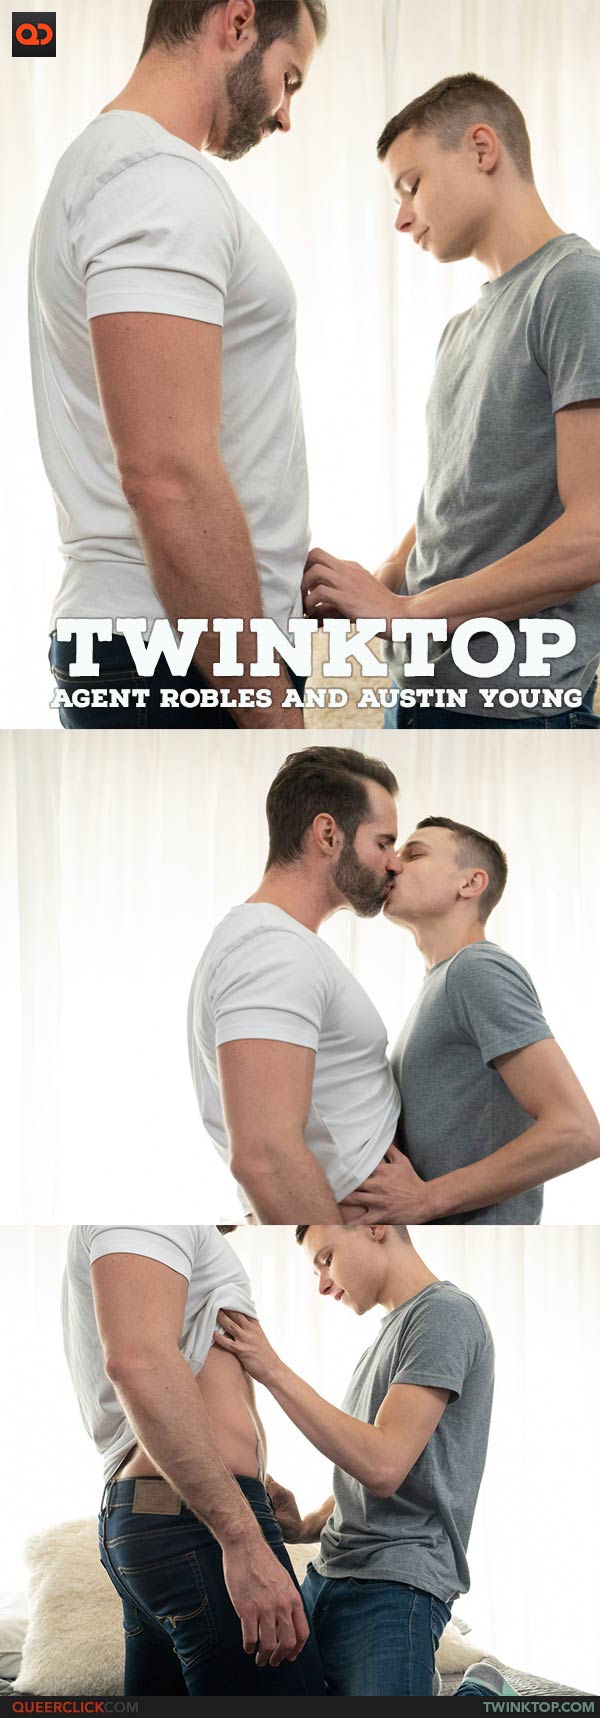 TwinkTop: Agent Robles and Austin Young